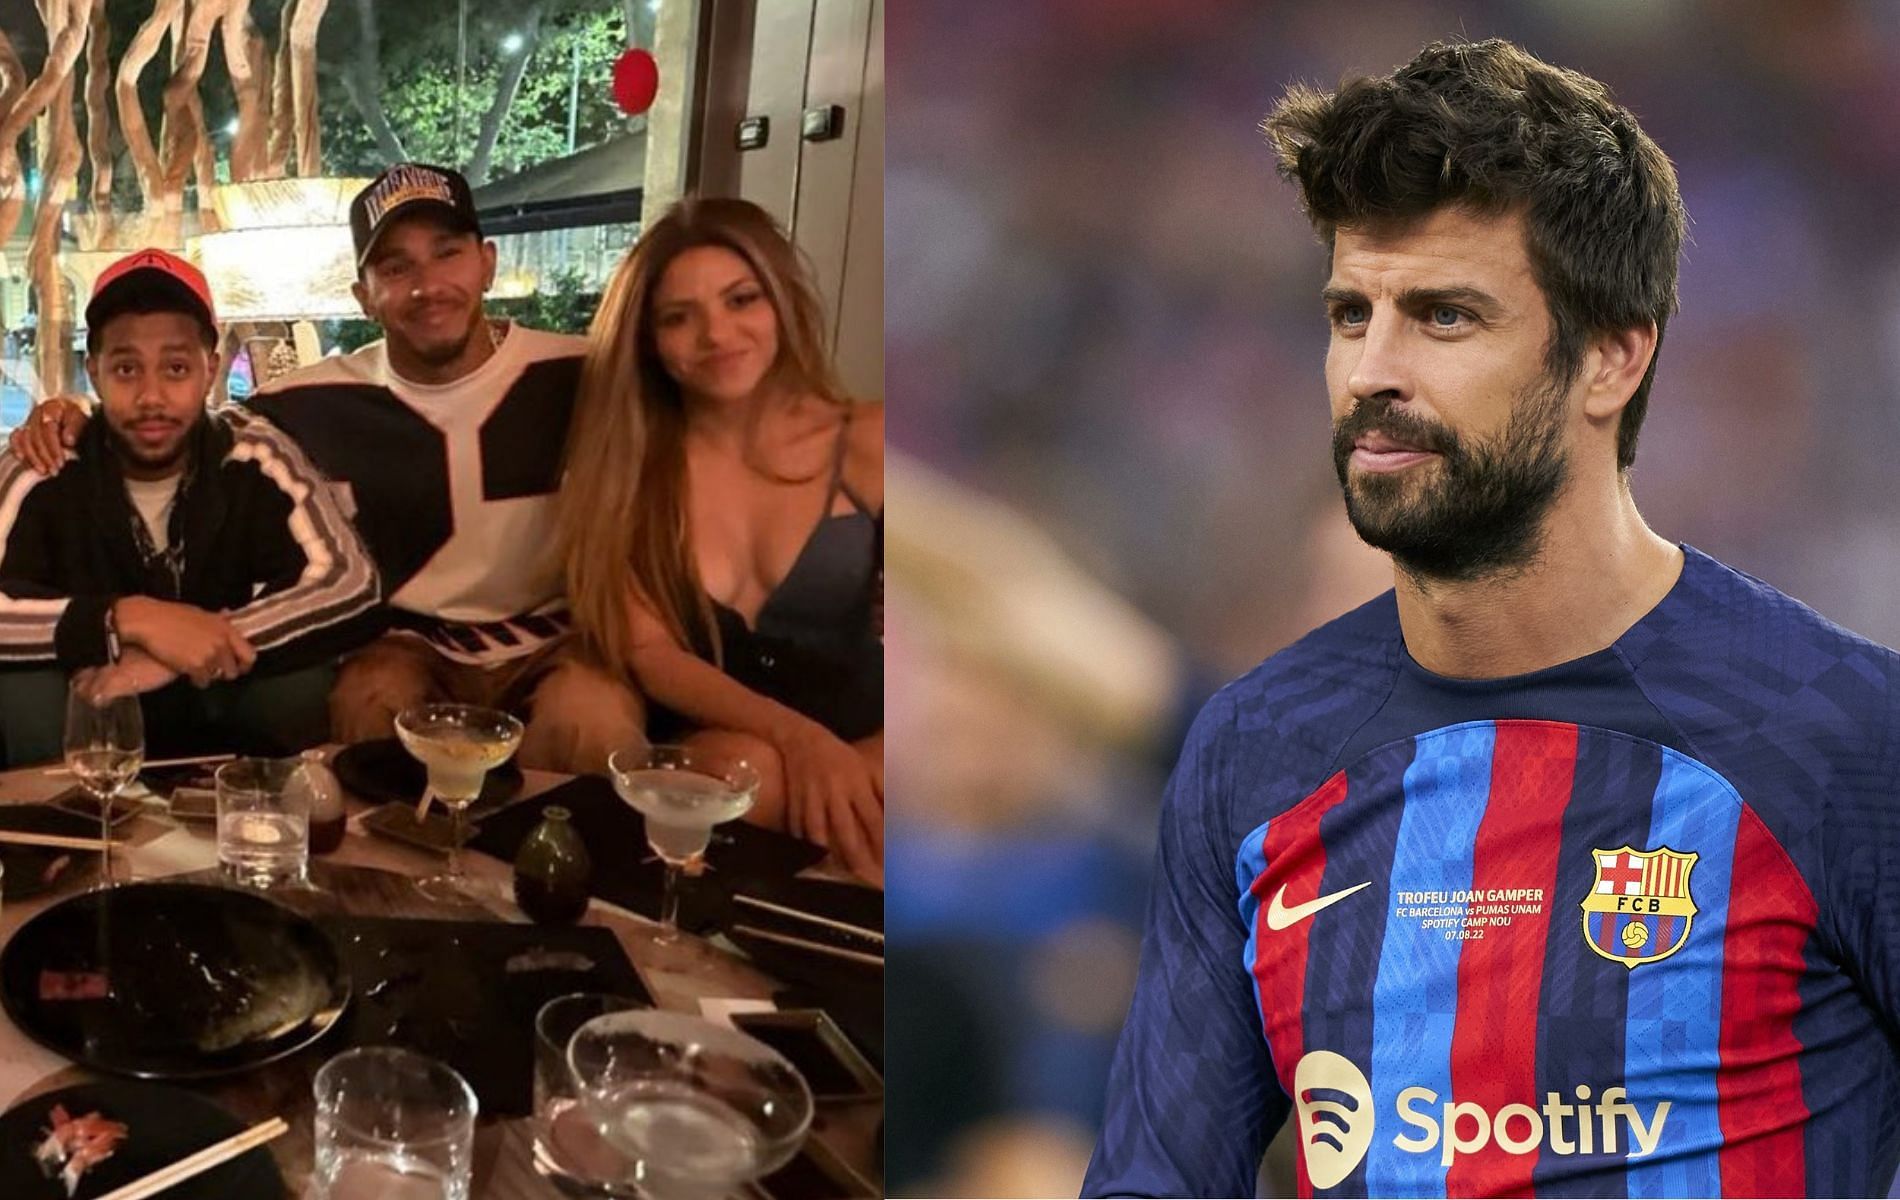 Lewis Hamilton and Shakira have dinner in Spain. Barcelona soccer star Gerard Pique on the right. Both images taken from Twitter. 